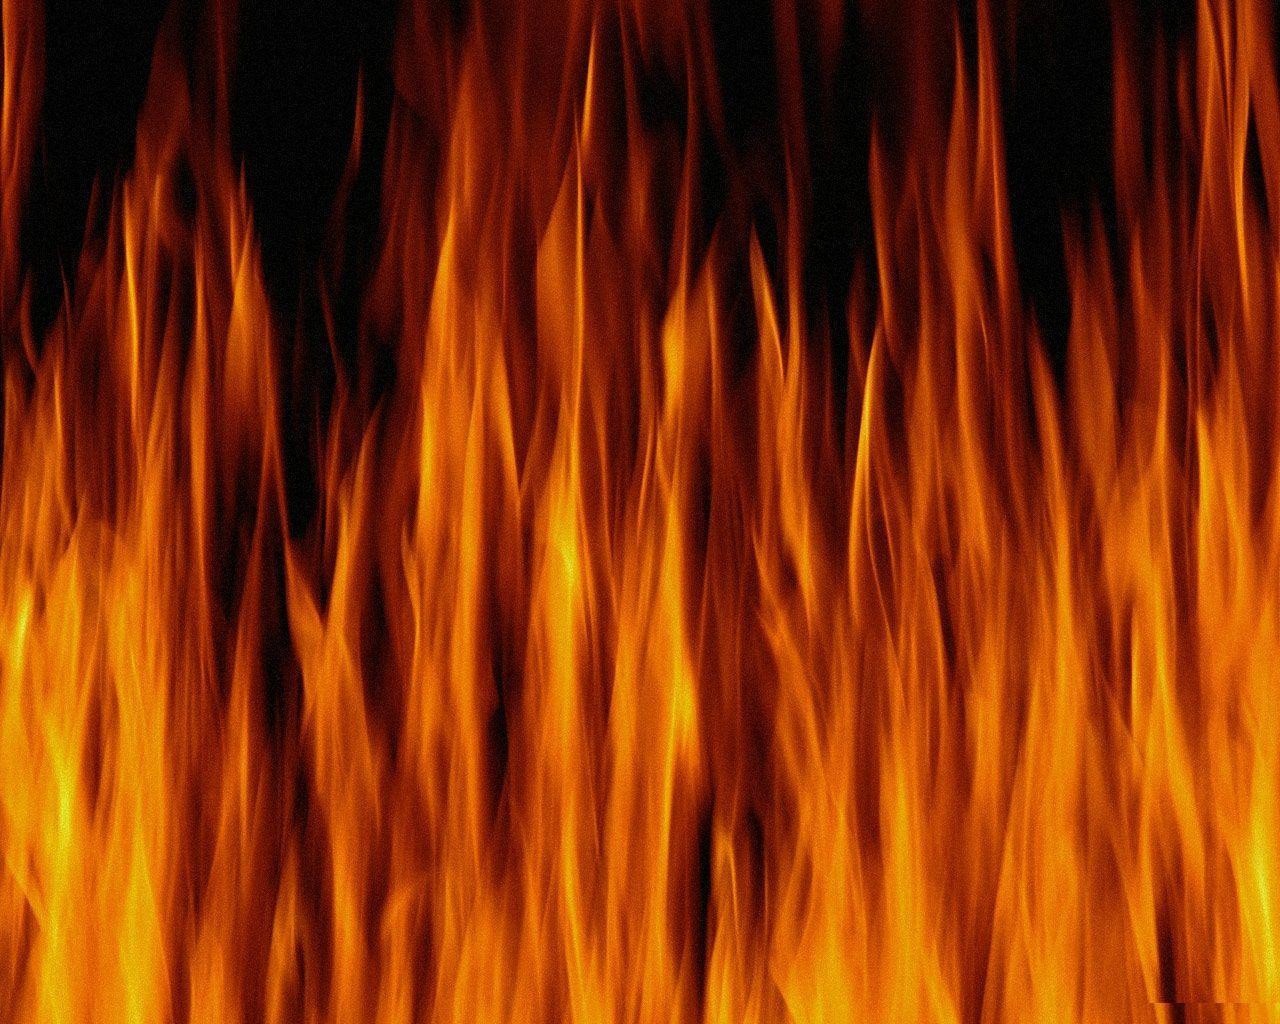 Flames in Fireplace Wallpaper HD Image